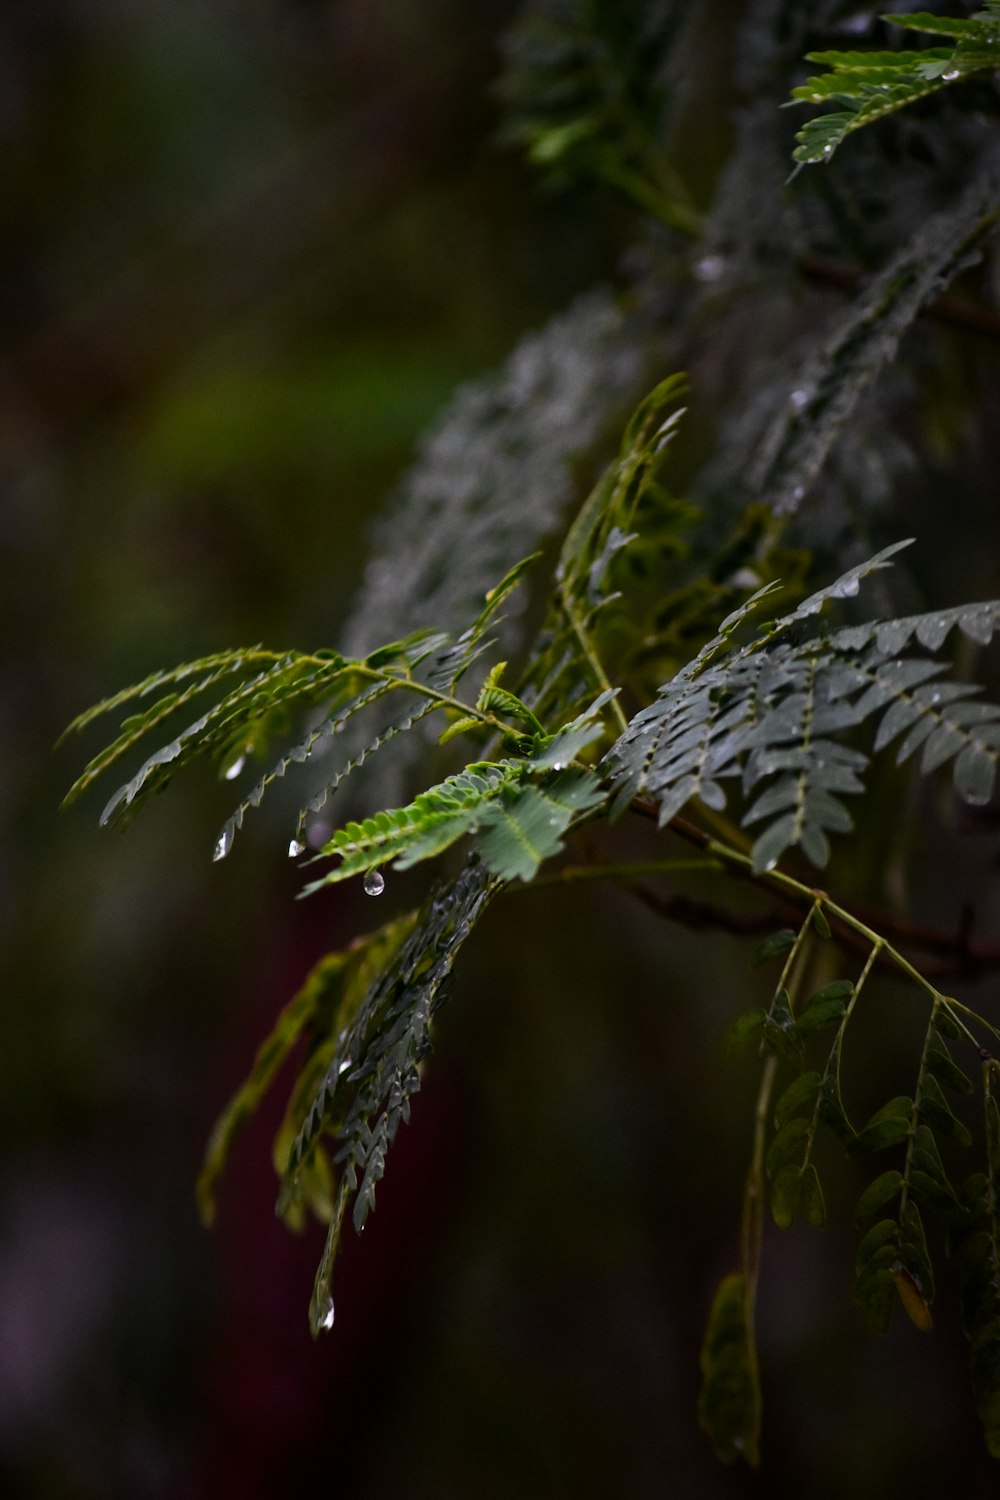 a close up of a tree branch with water droplets on it